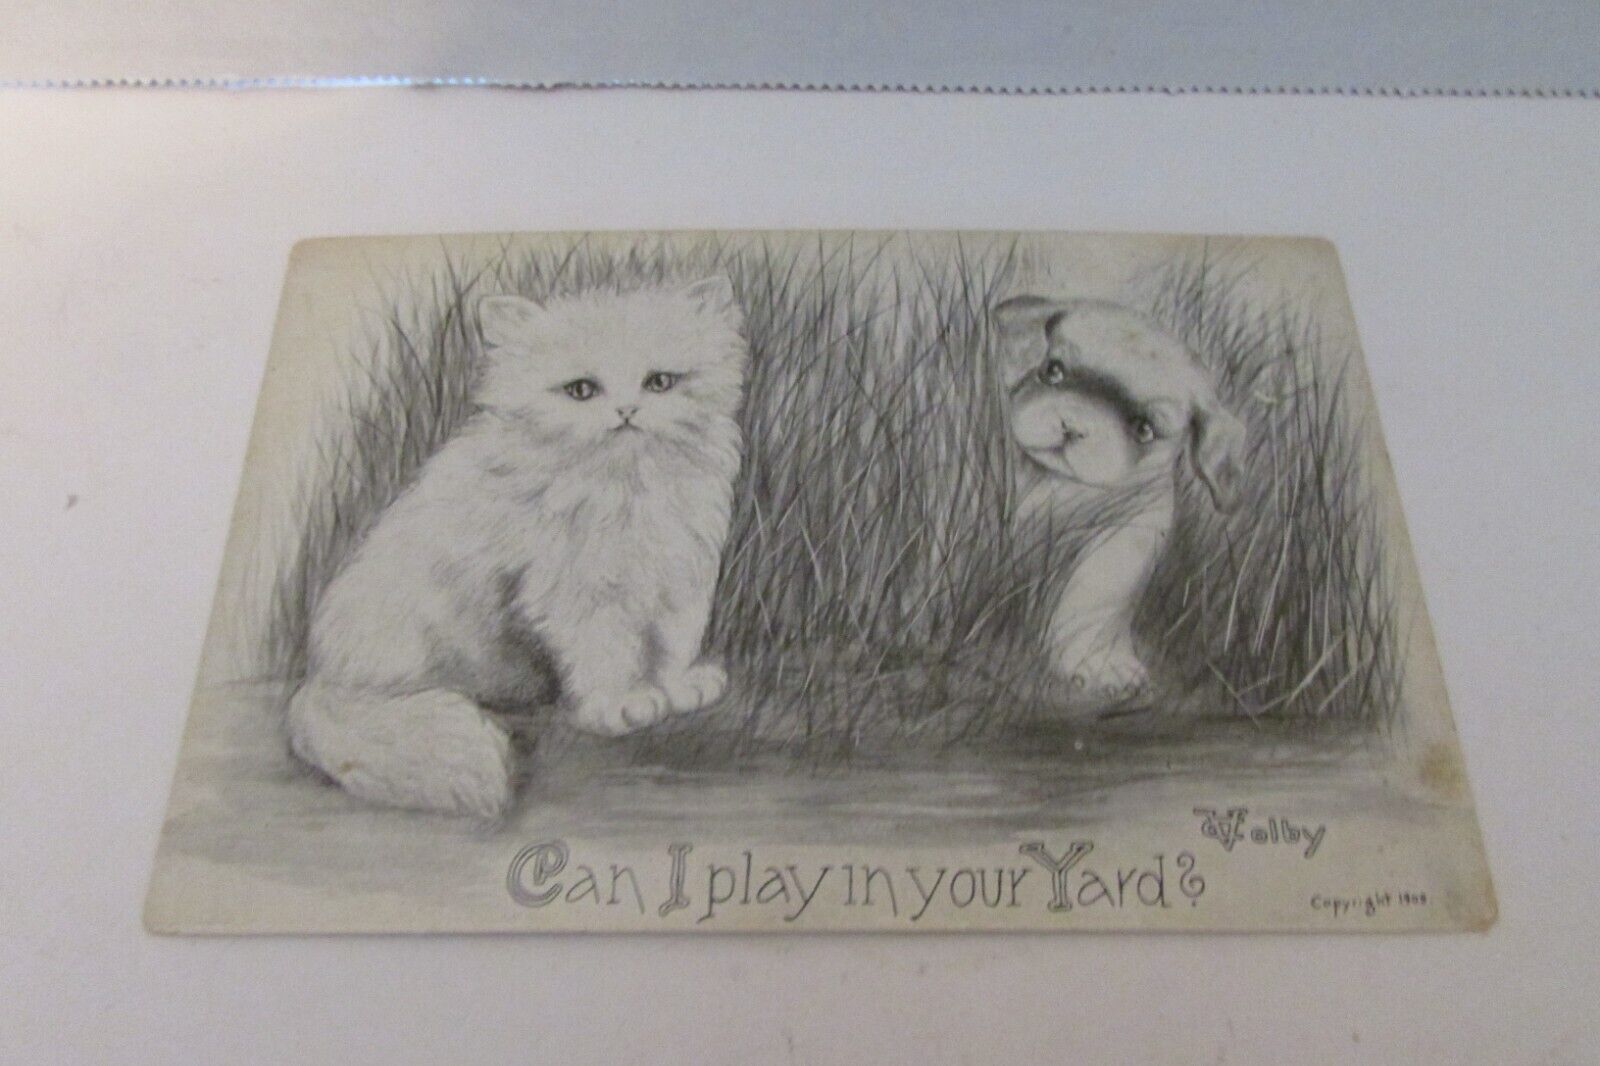 Cat Puppy Dog Playing V Colby 1910 Postcard